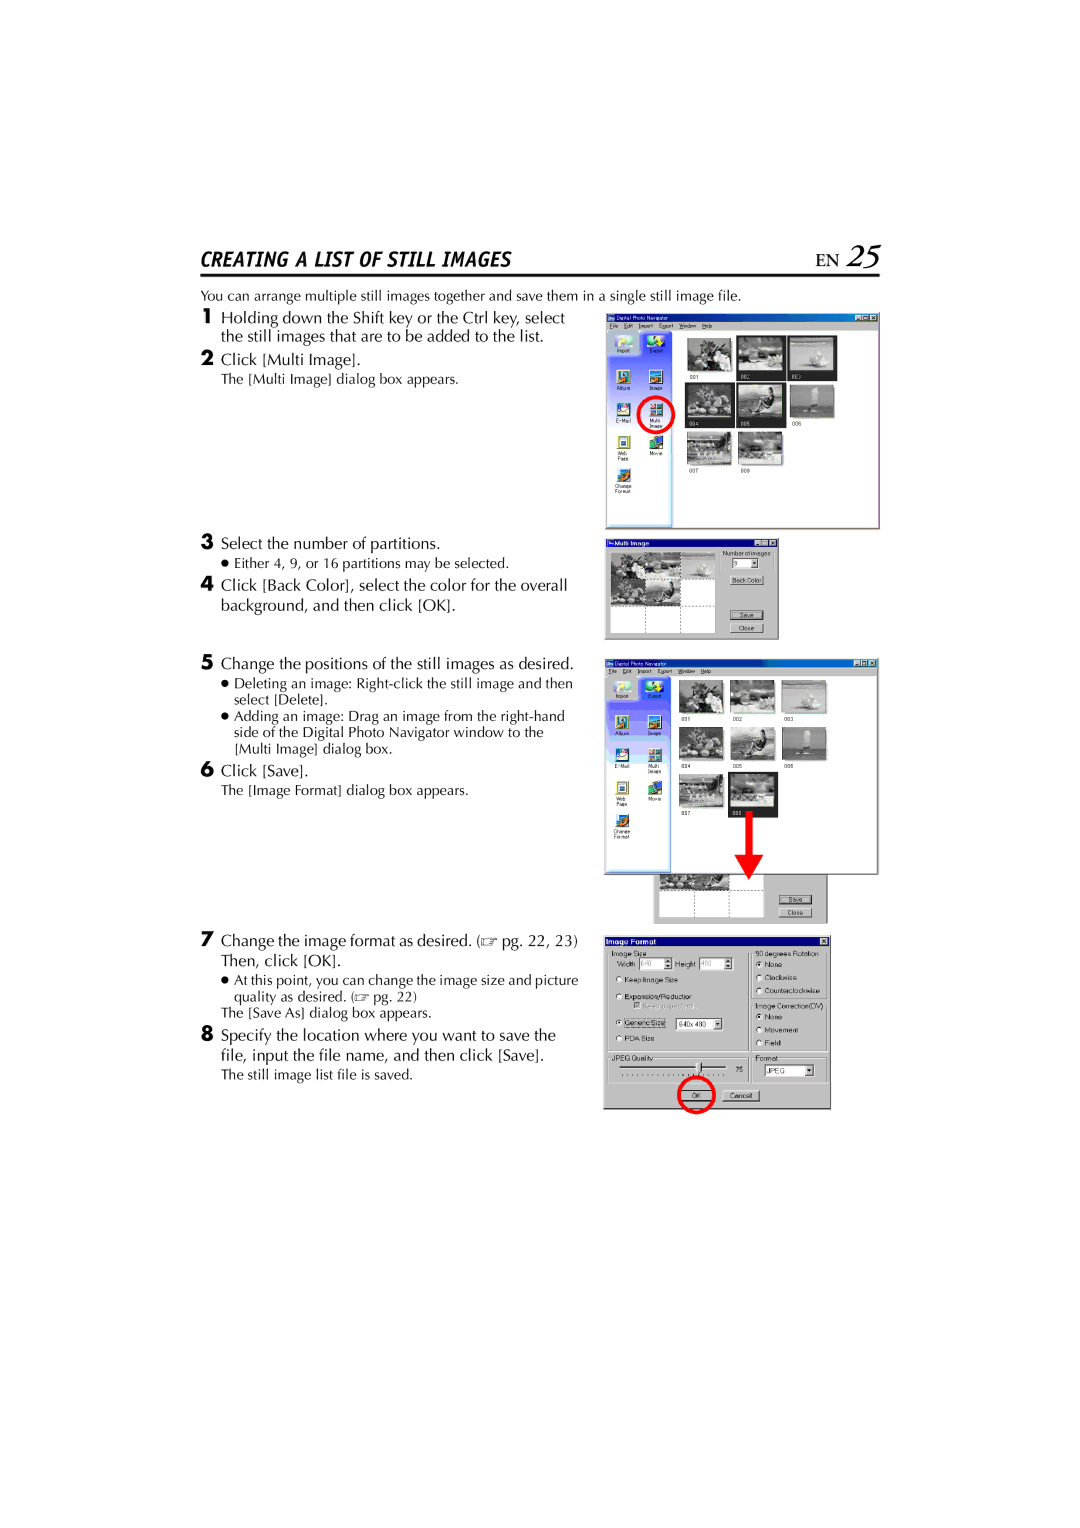 JVC LYT1147-001A manual Click Multi Image, Select the number of partitions, Click Save, Multi Image dialog box appears 